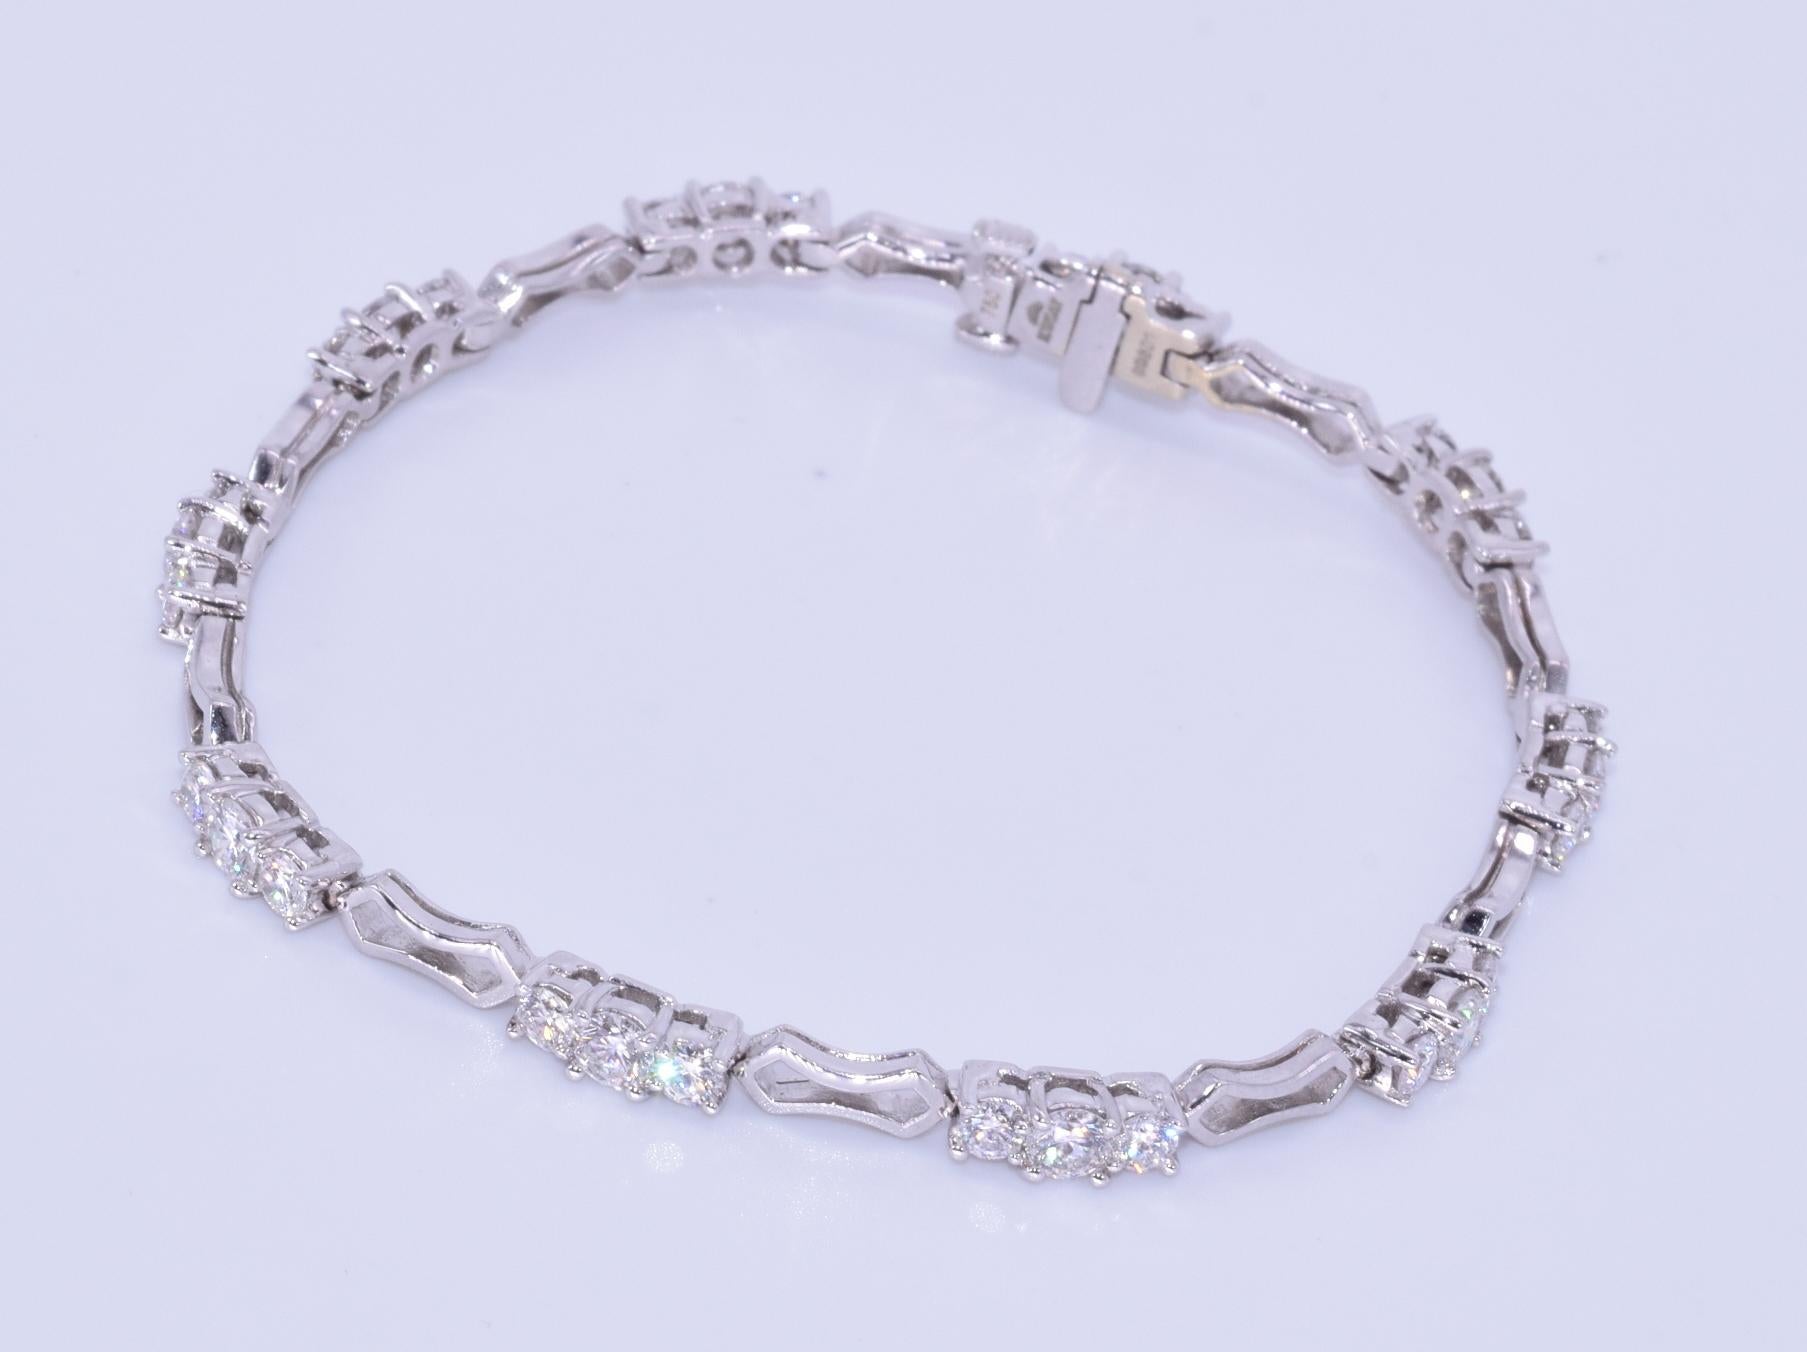 18k White Gold Diamond Bracelet, Signed Kwiat

This diamond bracelet is from the Crescent Collection with 30 round brilliant diamonds totaling 2.94 carats, GH/VS2-SI1 mounted in 18k white gold.  The bracelet is 6.75 inches in length.  The original